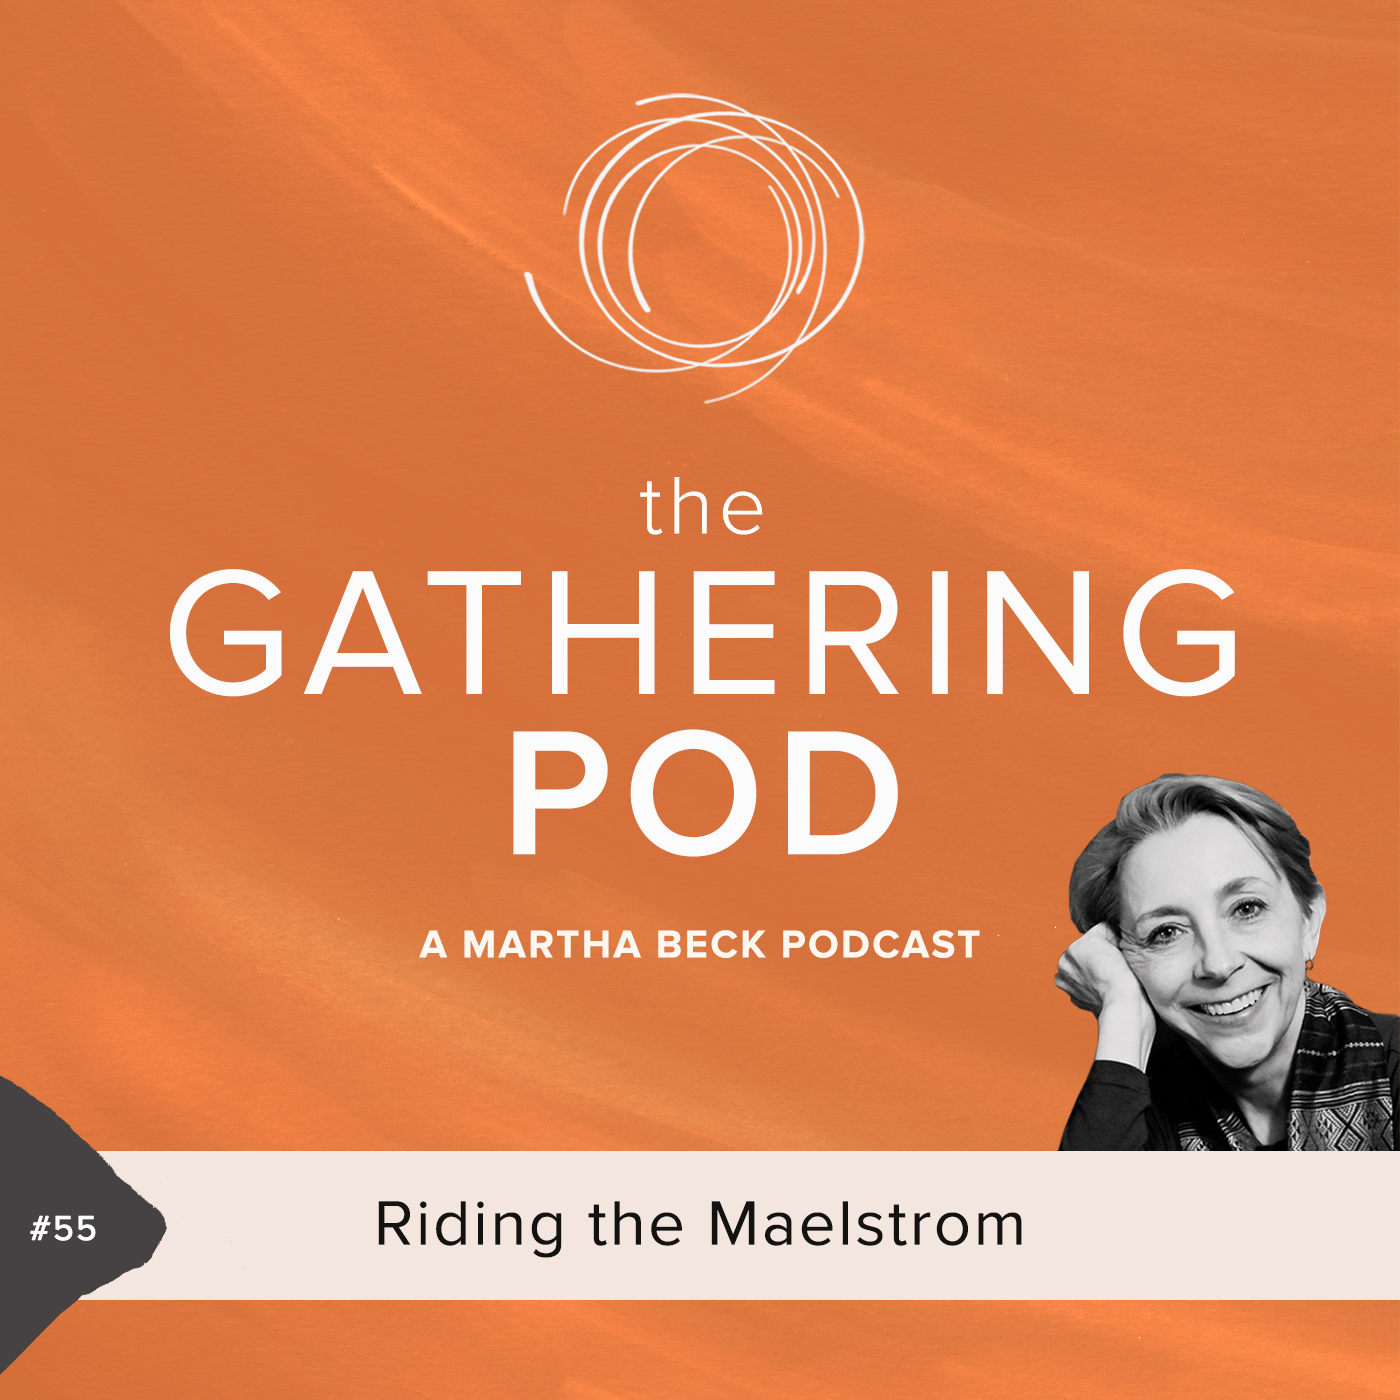 Image for The Gathering Pod A Martha Beck Podcast Episode #55 Riding the Maelstrom